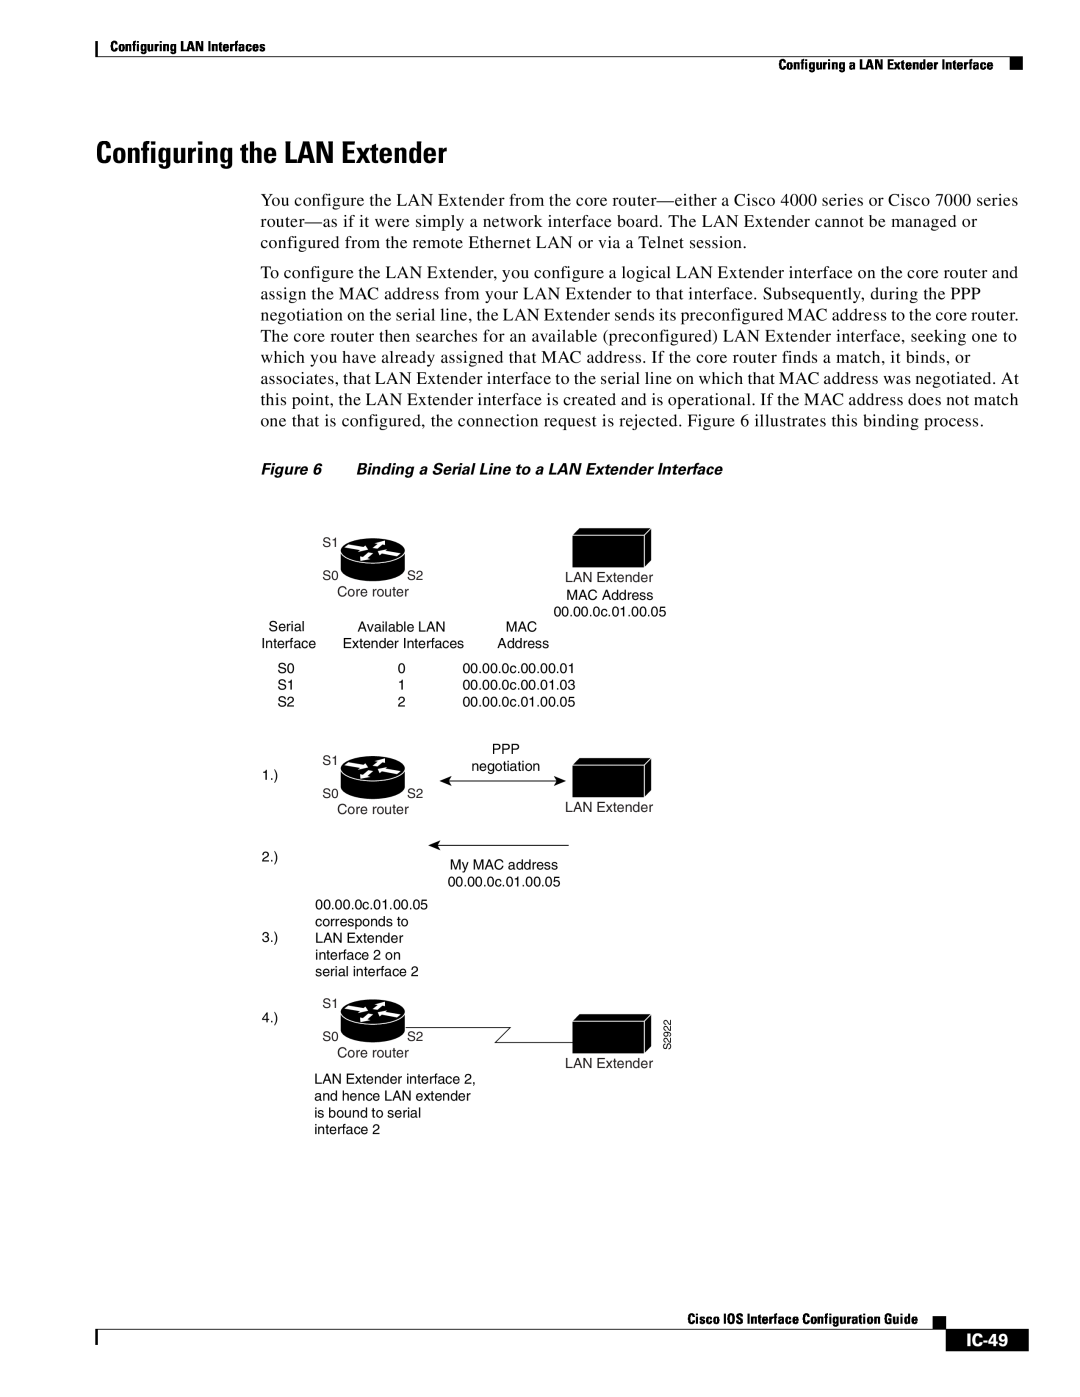 Cisco Systems IC-23 manual Configuring the LAN Extender, IC-49 